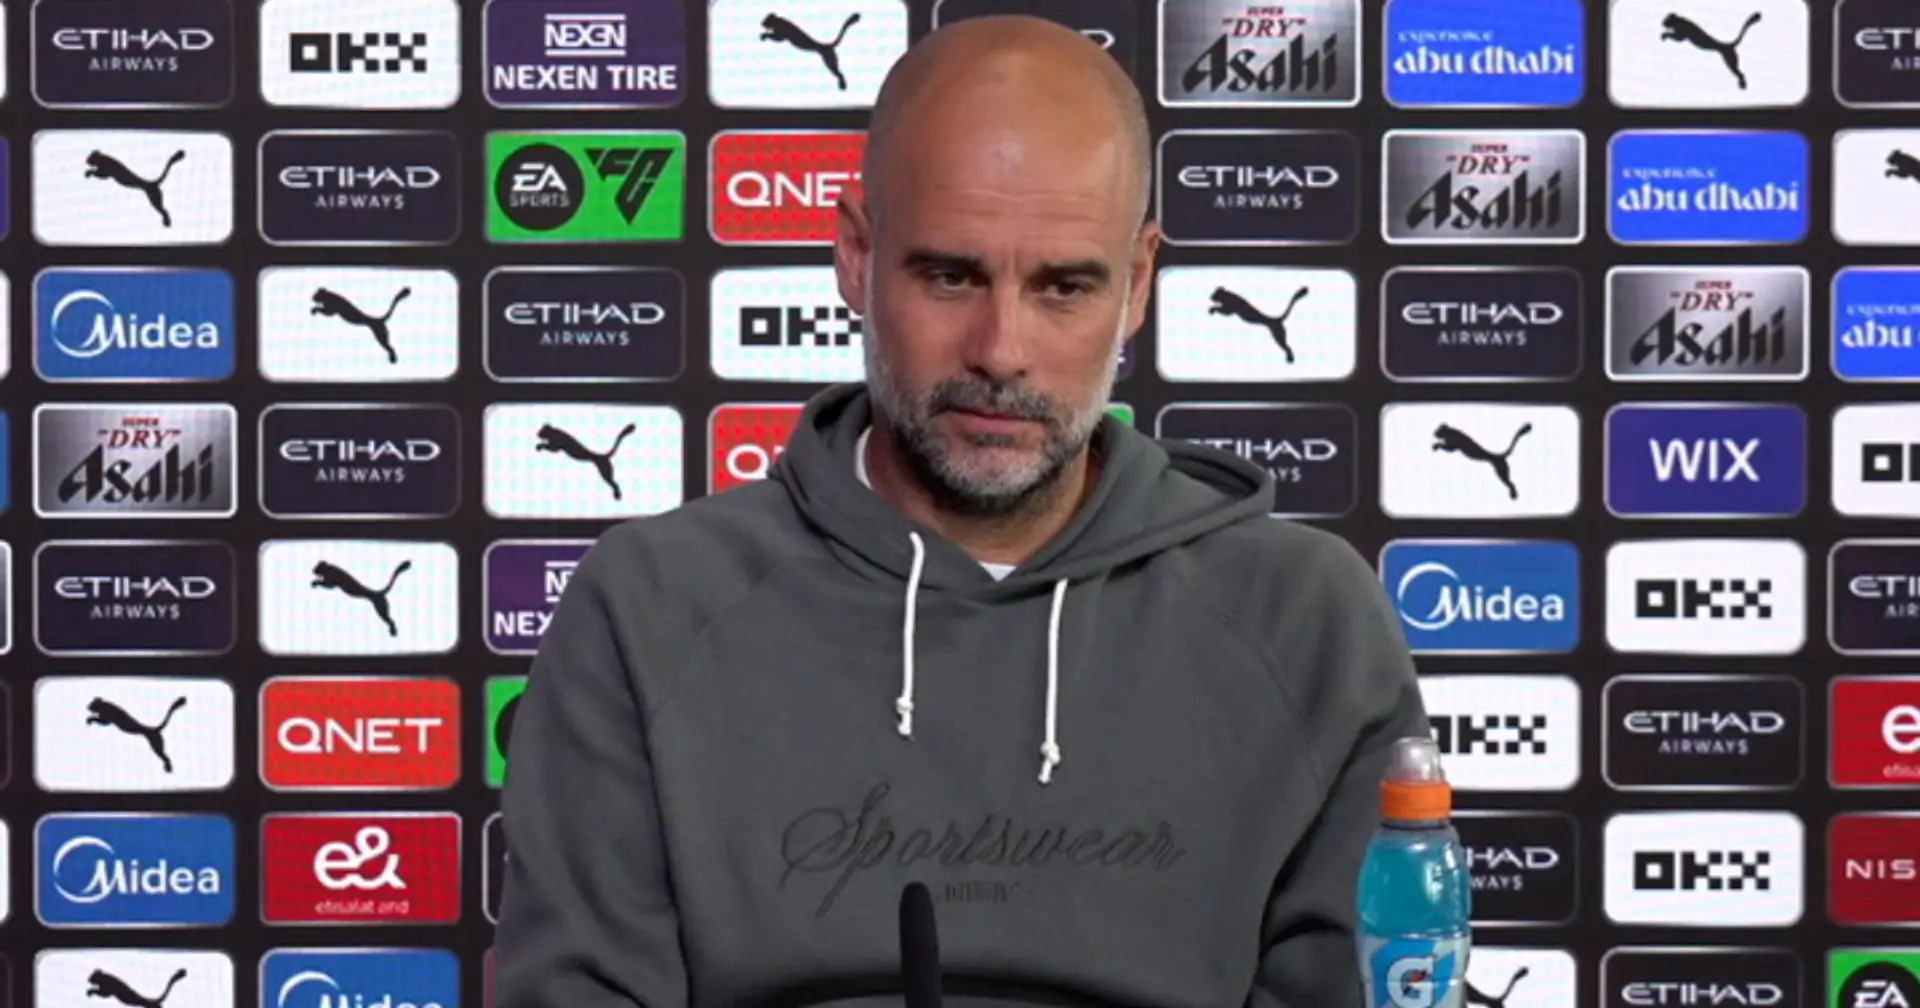 'Man United should've won all the titles': Pep Guardiola on accusations Man City's success is down to money